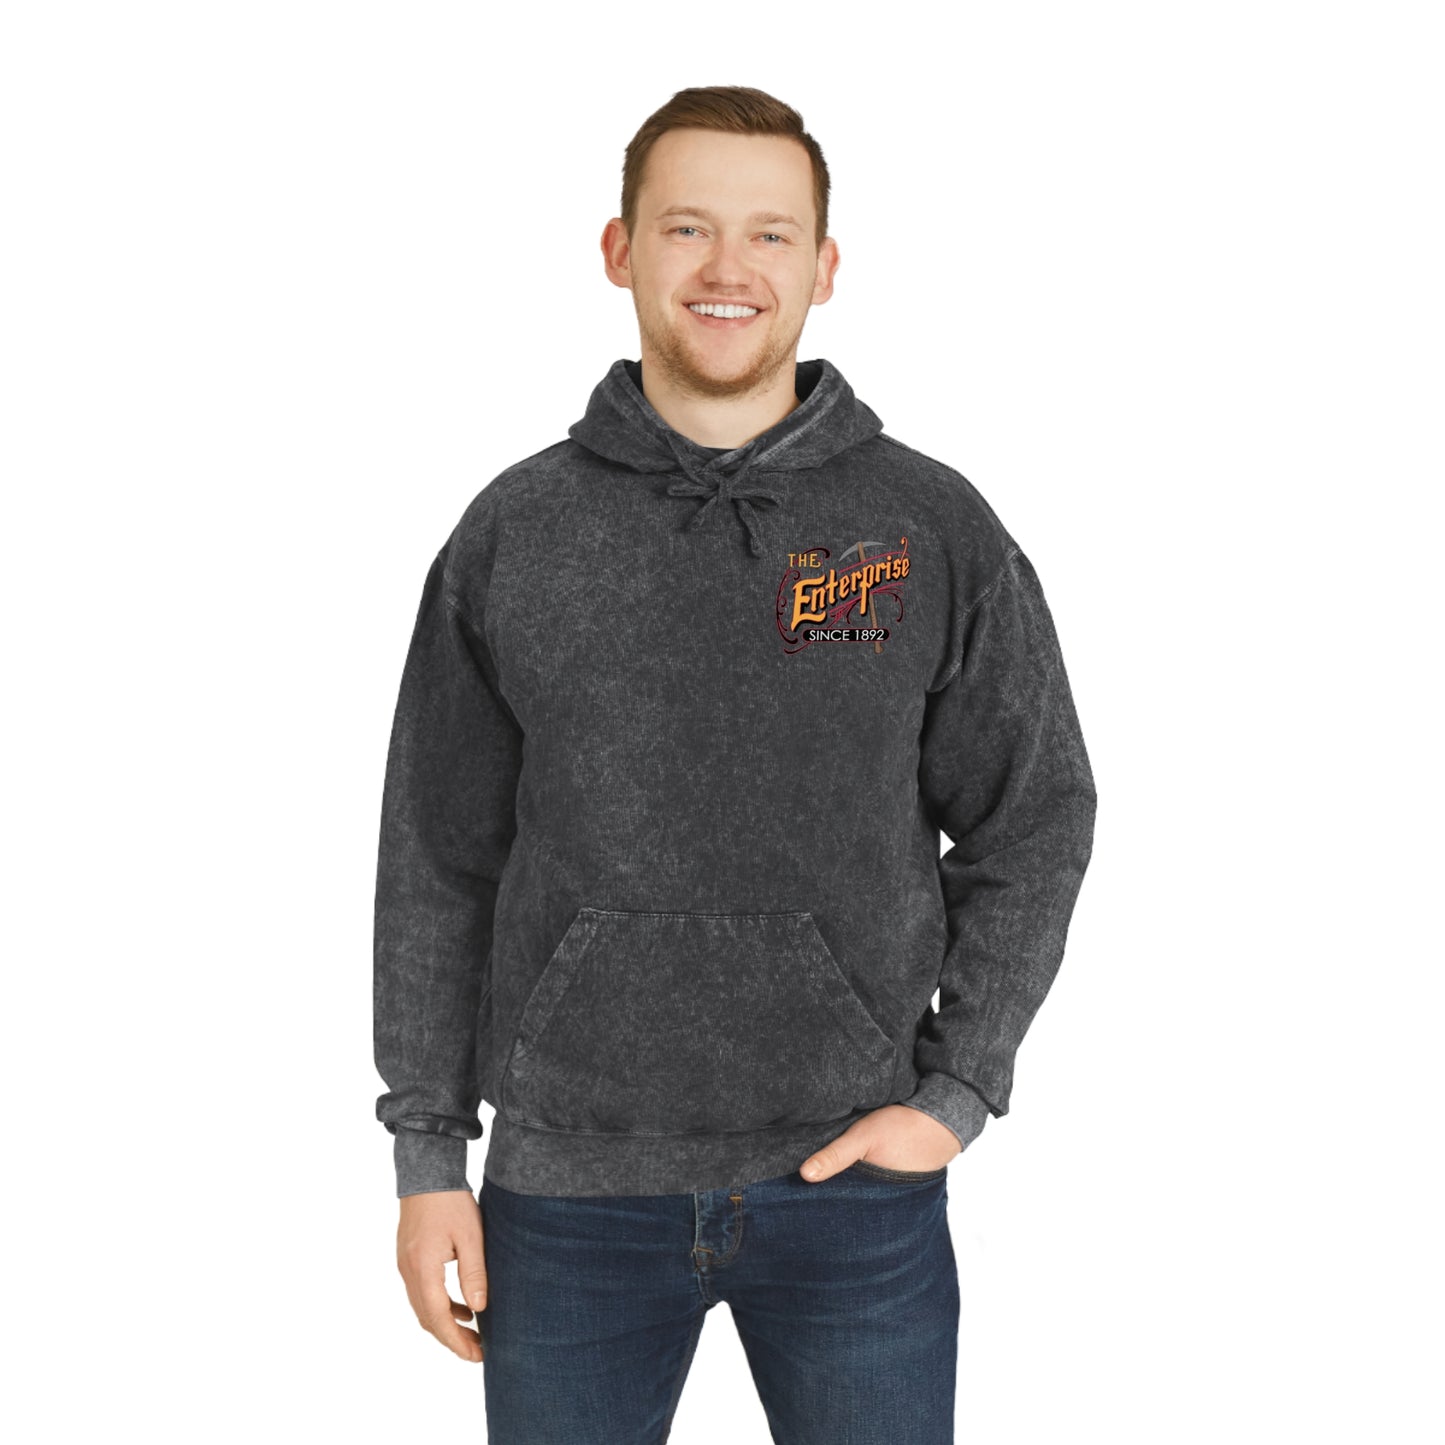 Bottom's Up Mineral Wash Hoodie